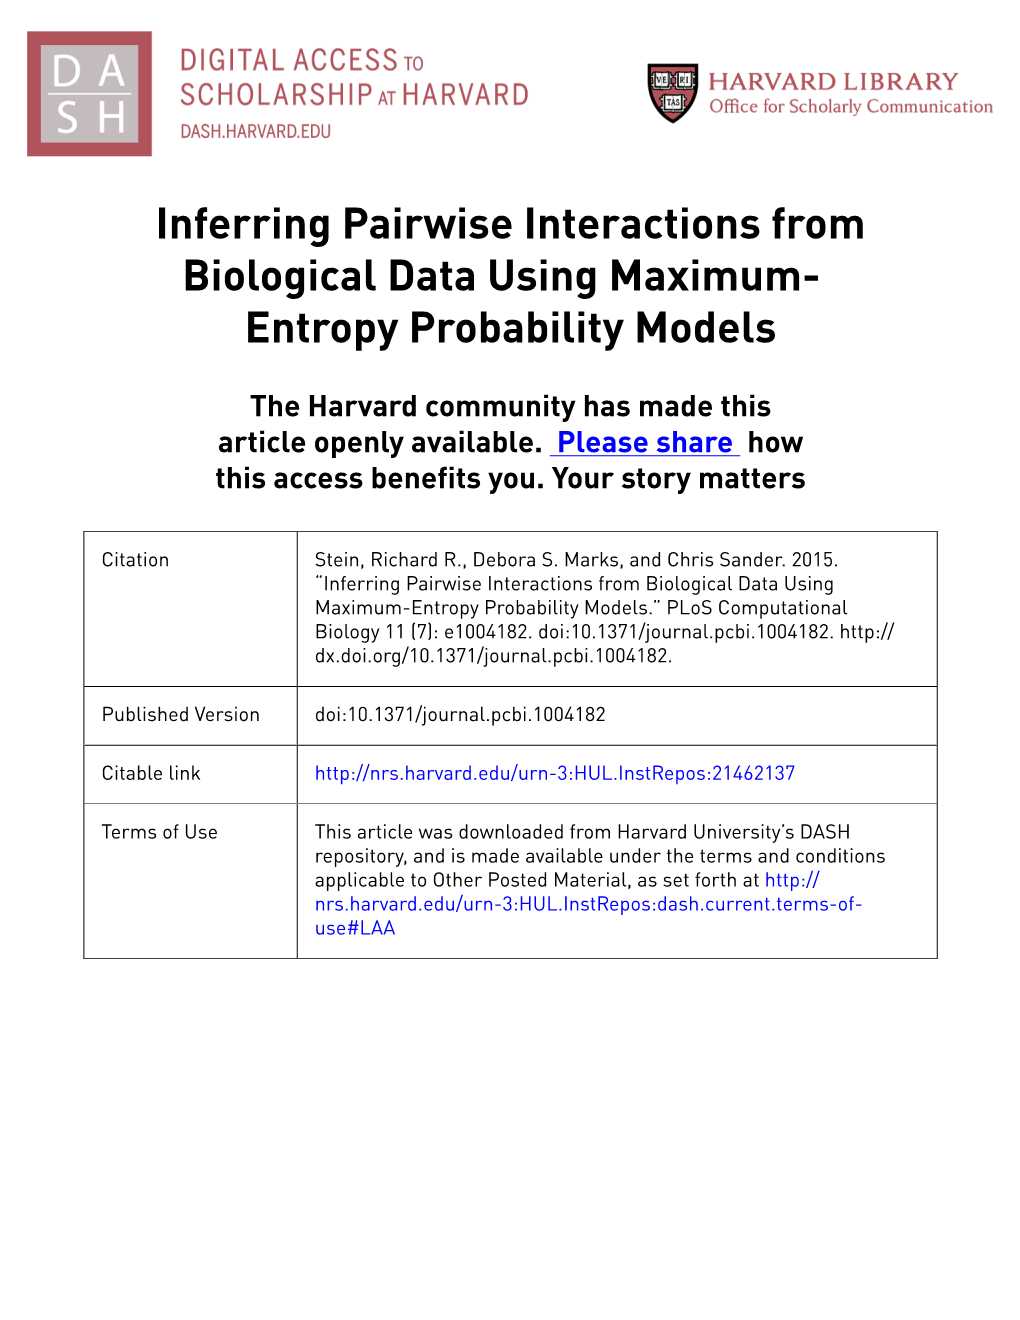 Inferring Pairwise Interactions from Biological Data Using Maximum- Entropy Probability Models